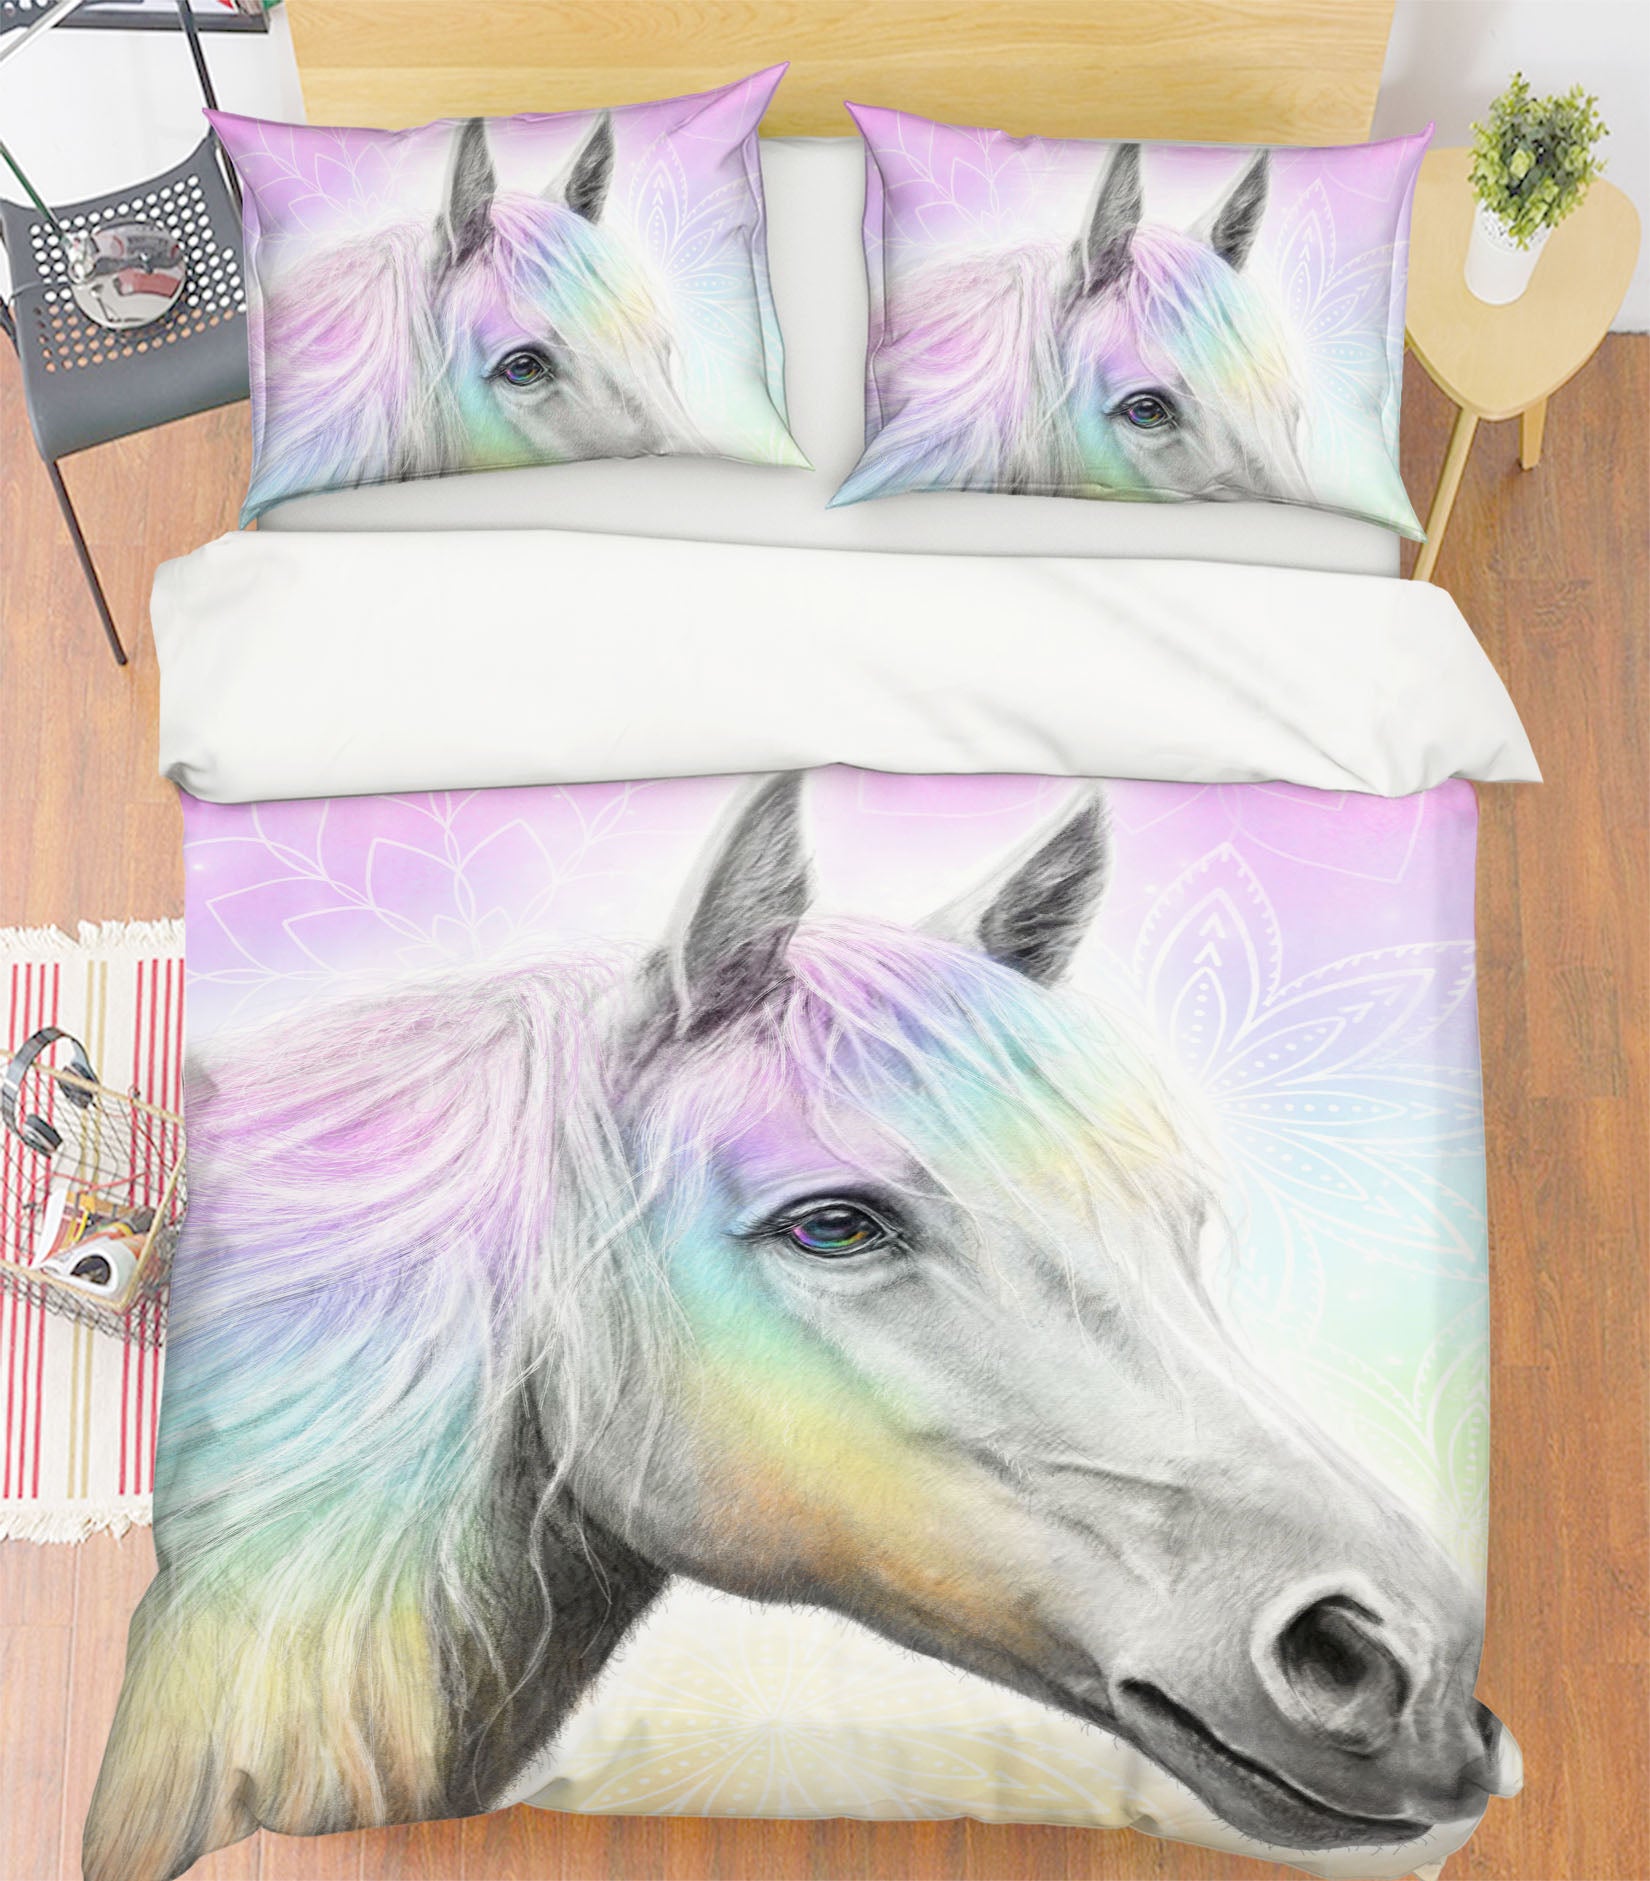 3D Rainbow Horse 8585 Sheena Pike Bedding Bed Pillowcases Quilt Cover Duvet Cover